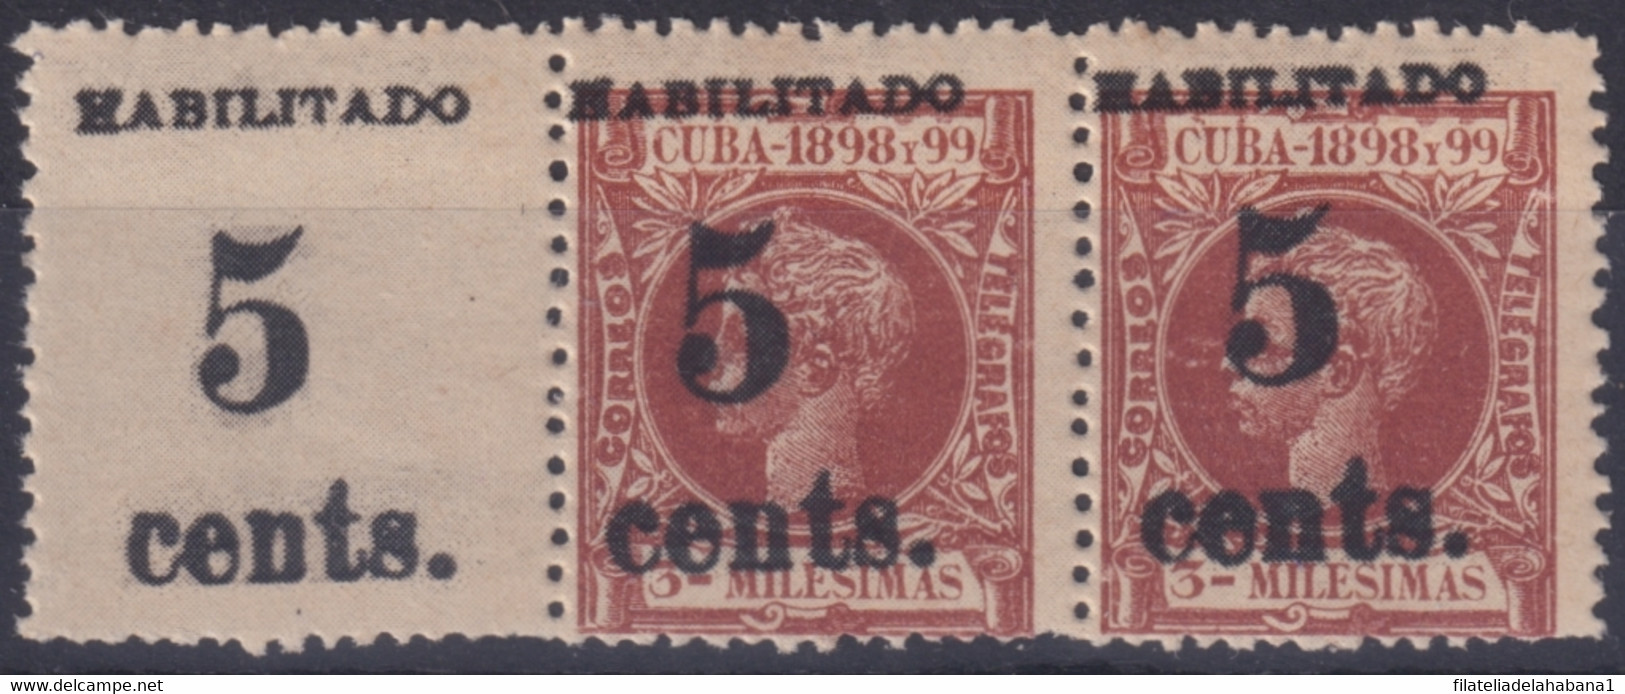 1899-494 CUBA 1899 5c S. 3c US OCCUPATION 2th ISSUE FINE NUMBER PHILATELIC FORGERY. - Ongebruikt